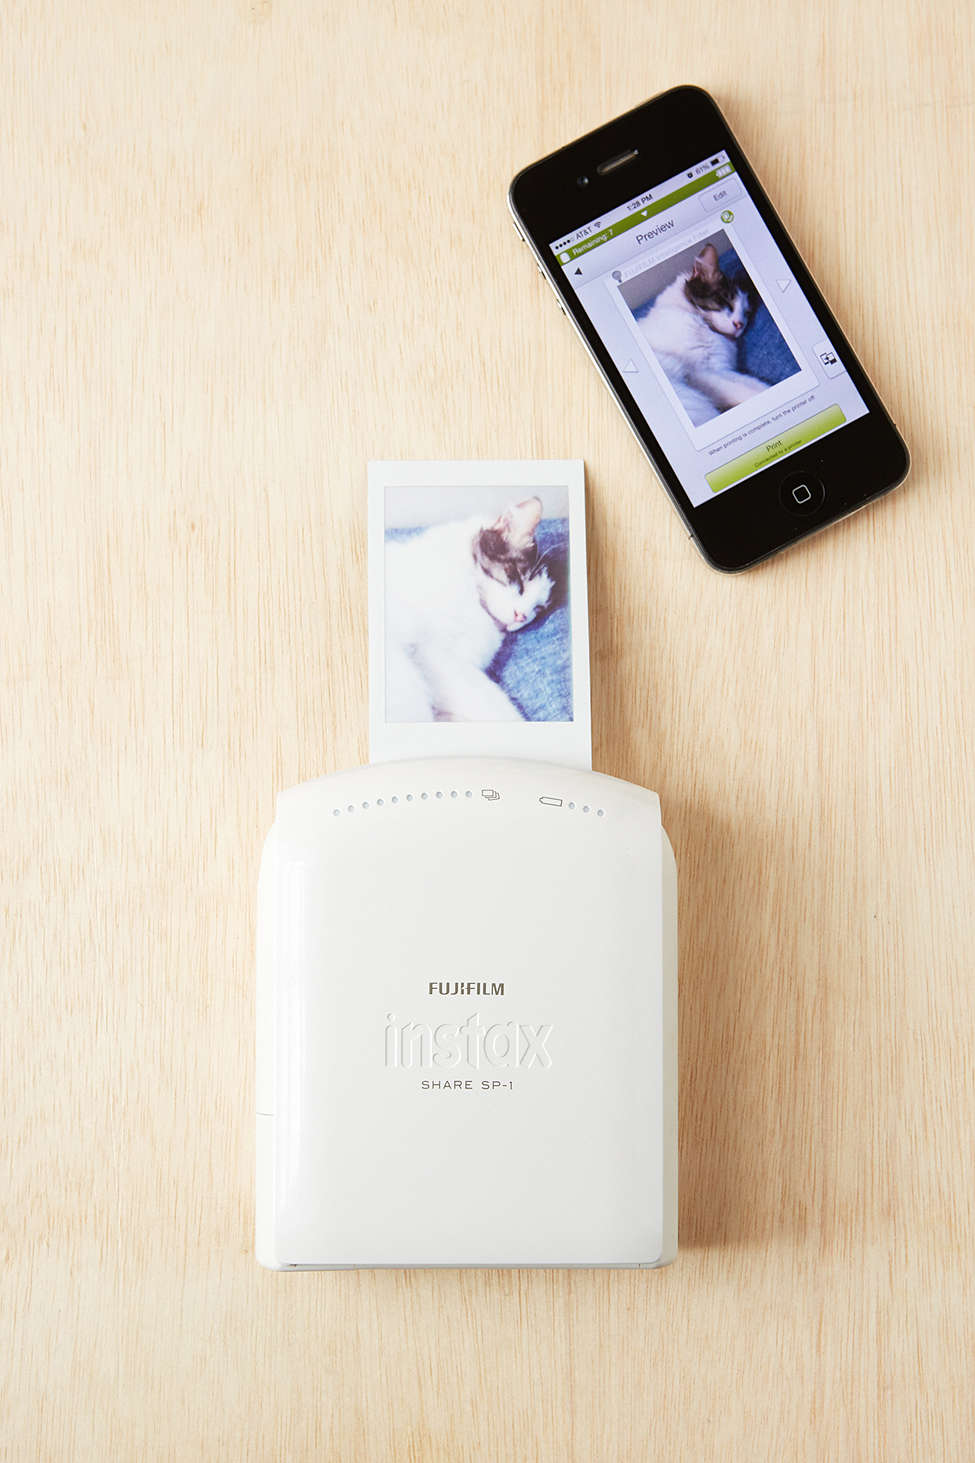 A Fujifilm Instax Instant Smartphone Printer printing cat images is one of various creative Valentine's Day gifts for her or him.